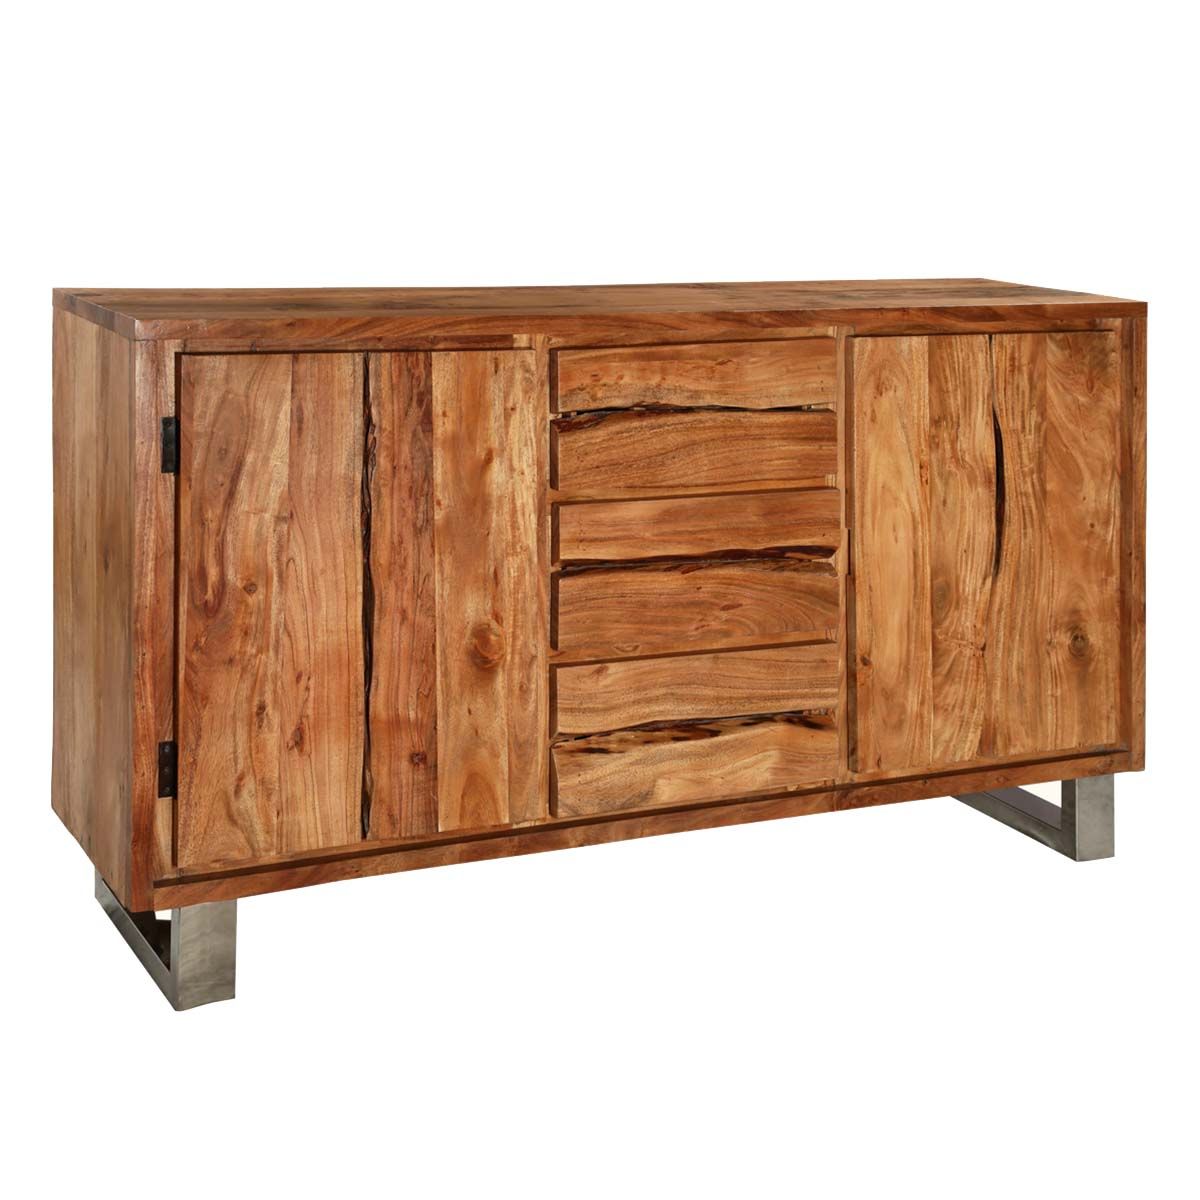 Acacia Wood 4 Door Sideboards With Regard To Best And Newest Modern Pioneer Acacia Wood Live Edge 3 Drawer Large Sideboard Cabinet (View 16 of 20)